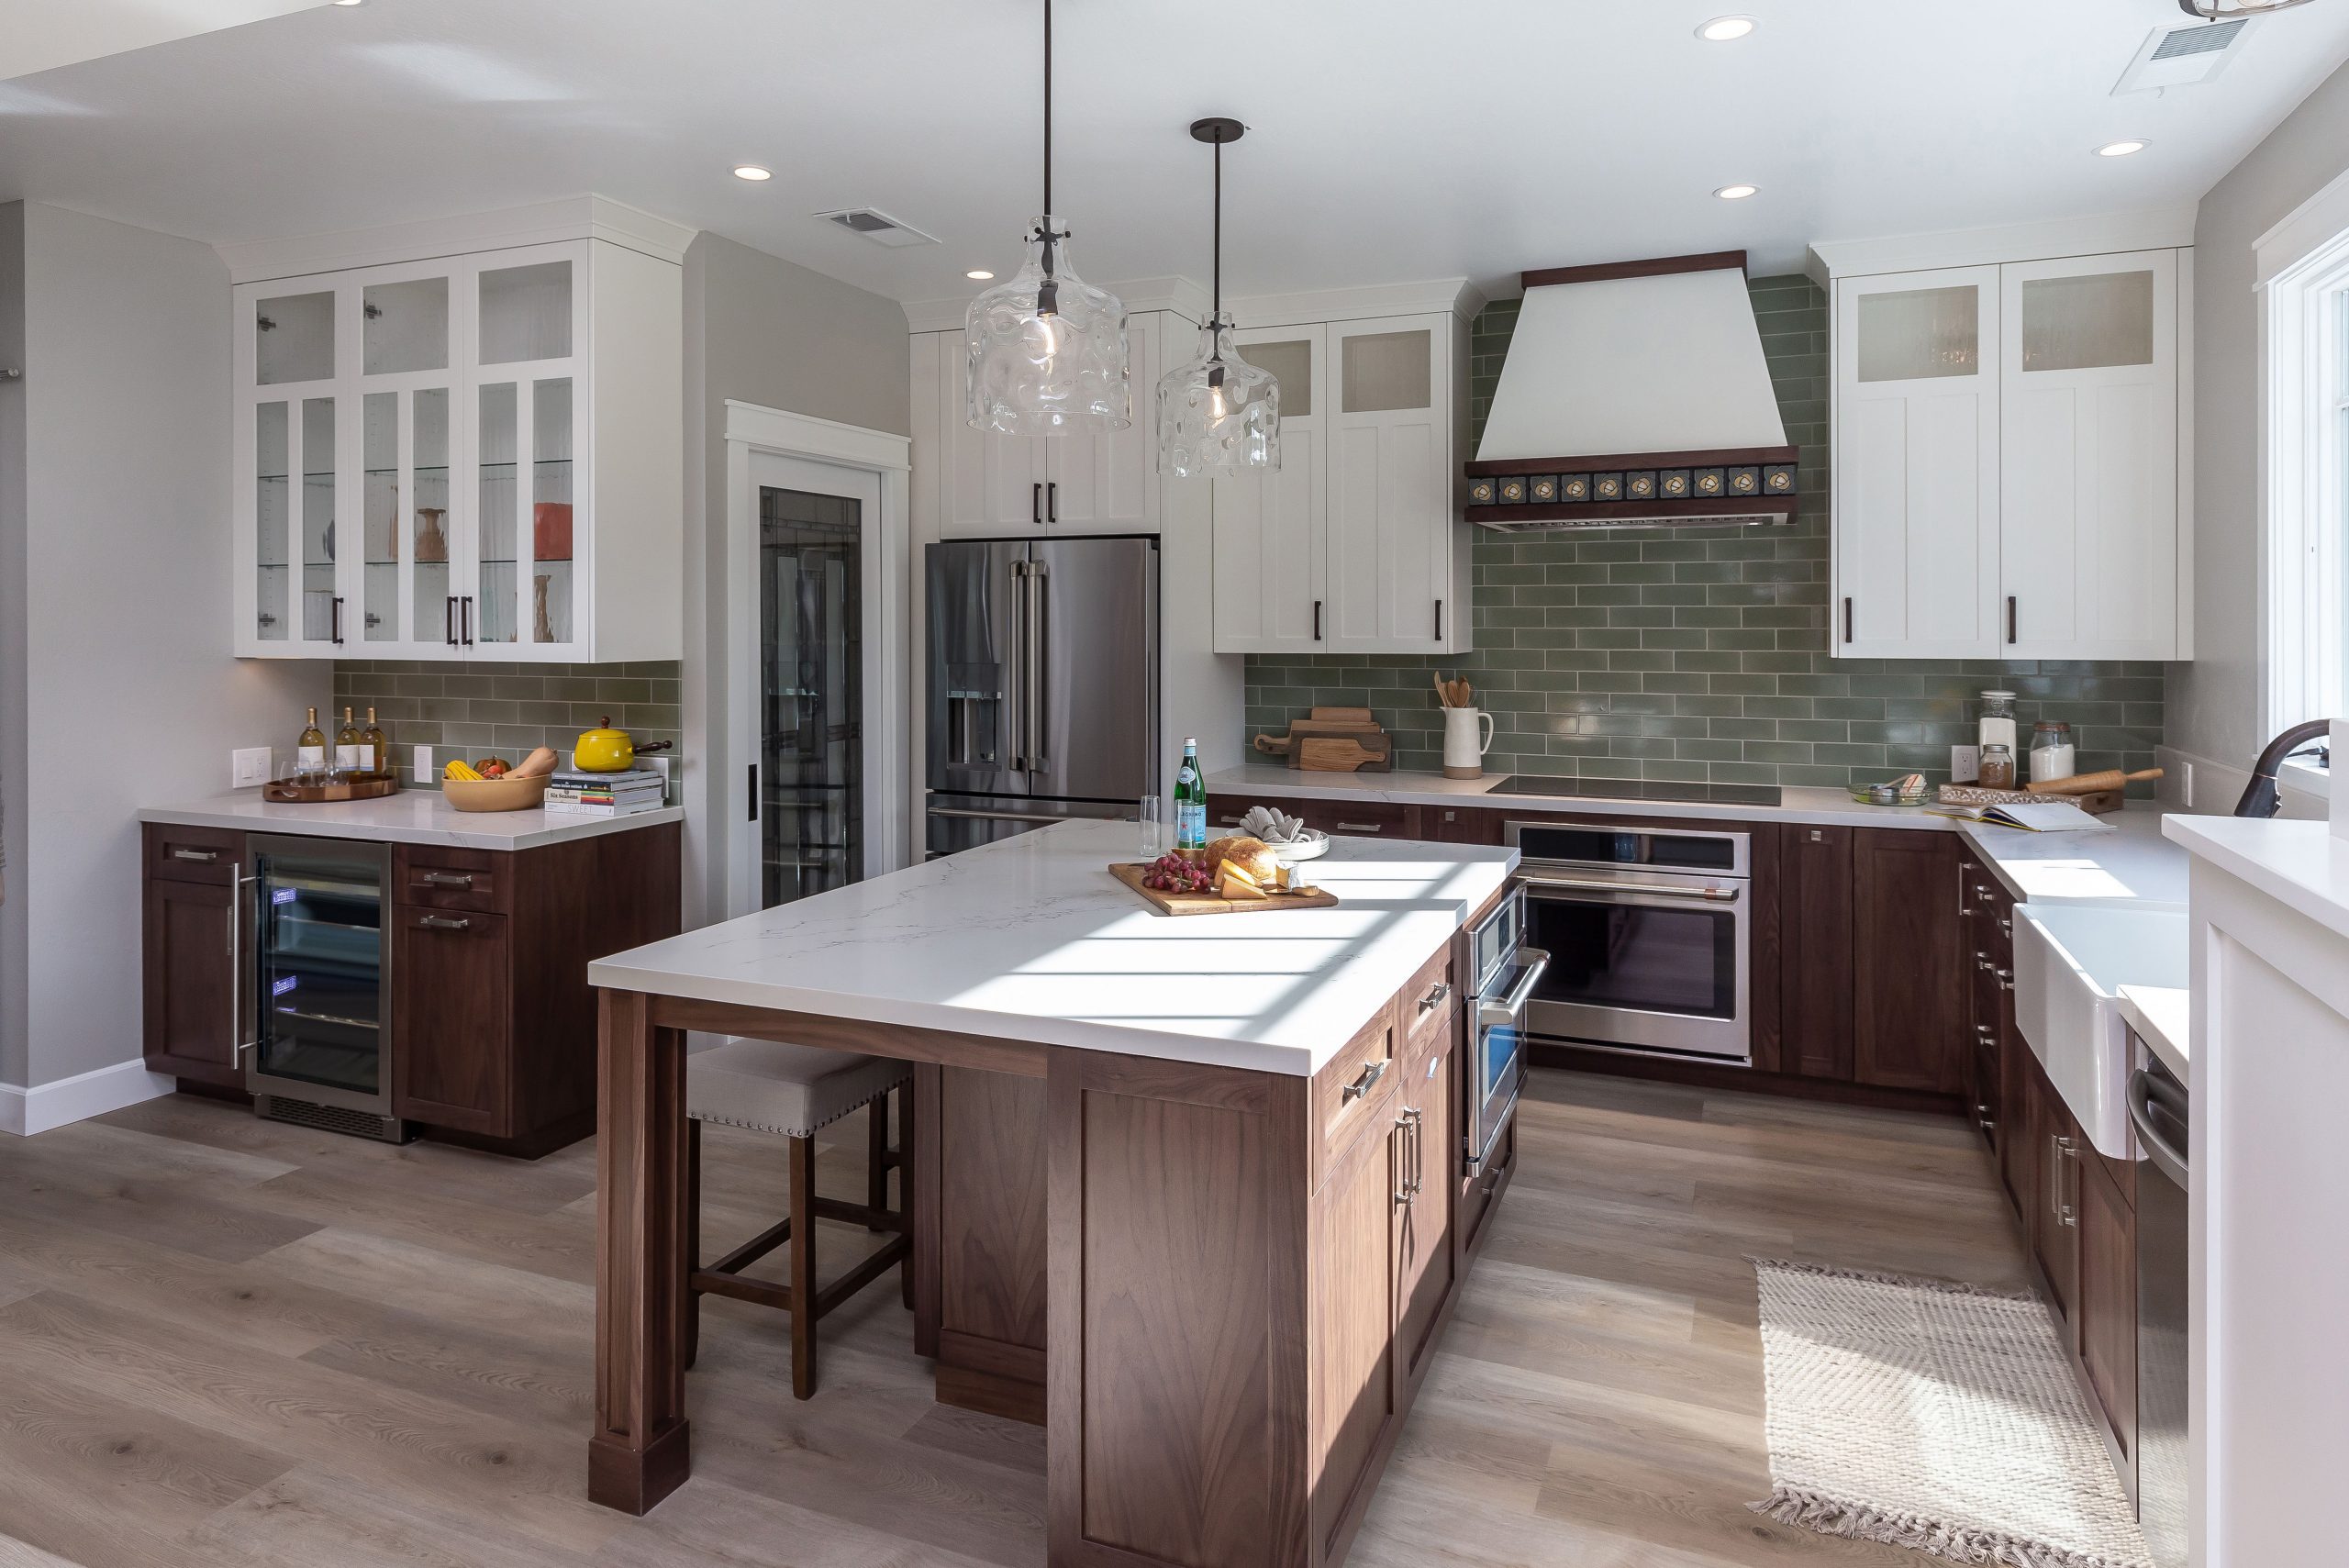 A-kitchen-remodel-requires-multiple-remodeling-steps-before-the-project-is-finished